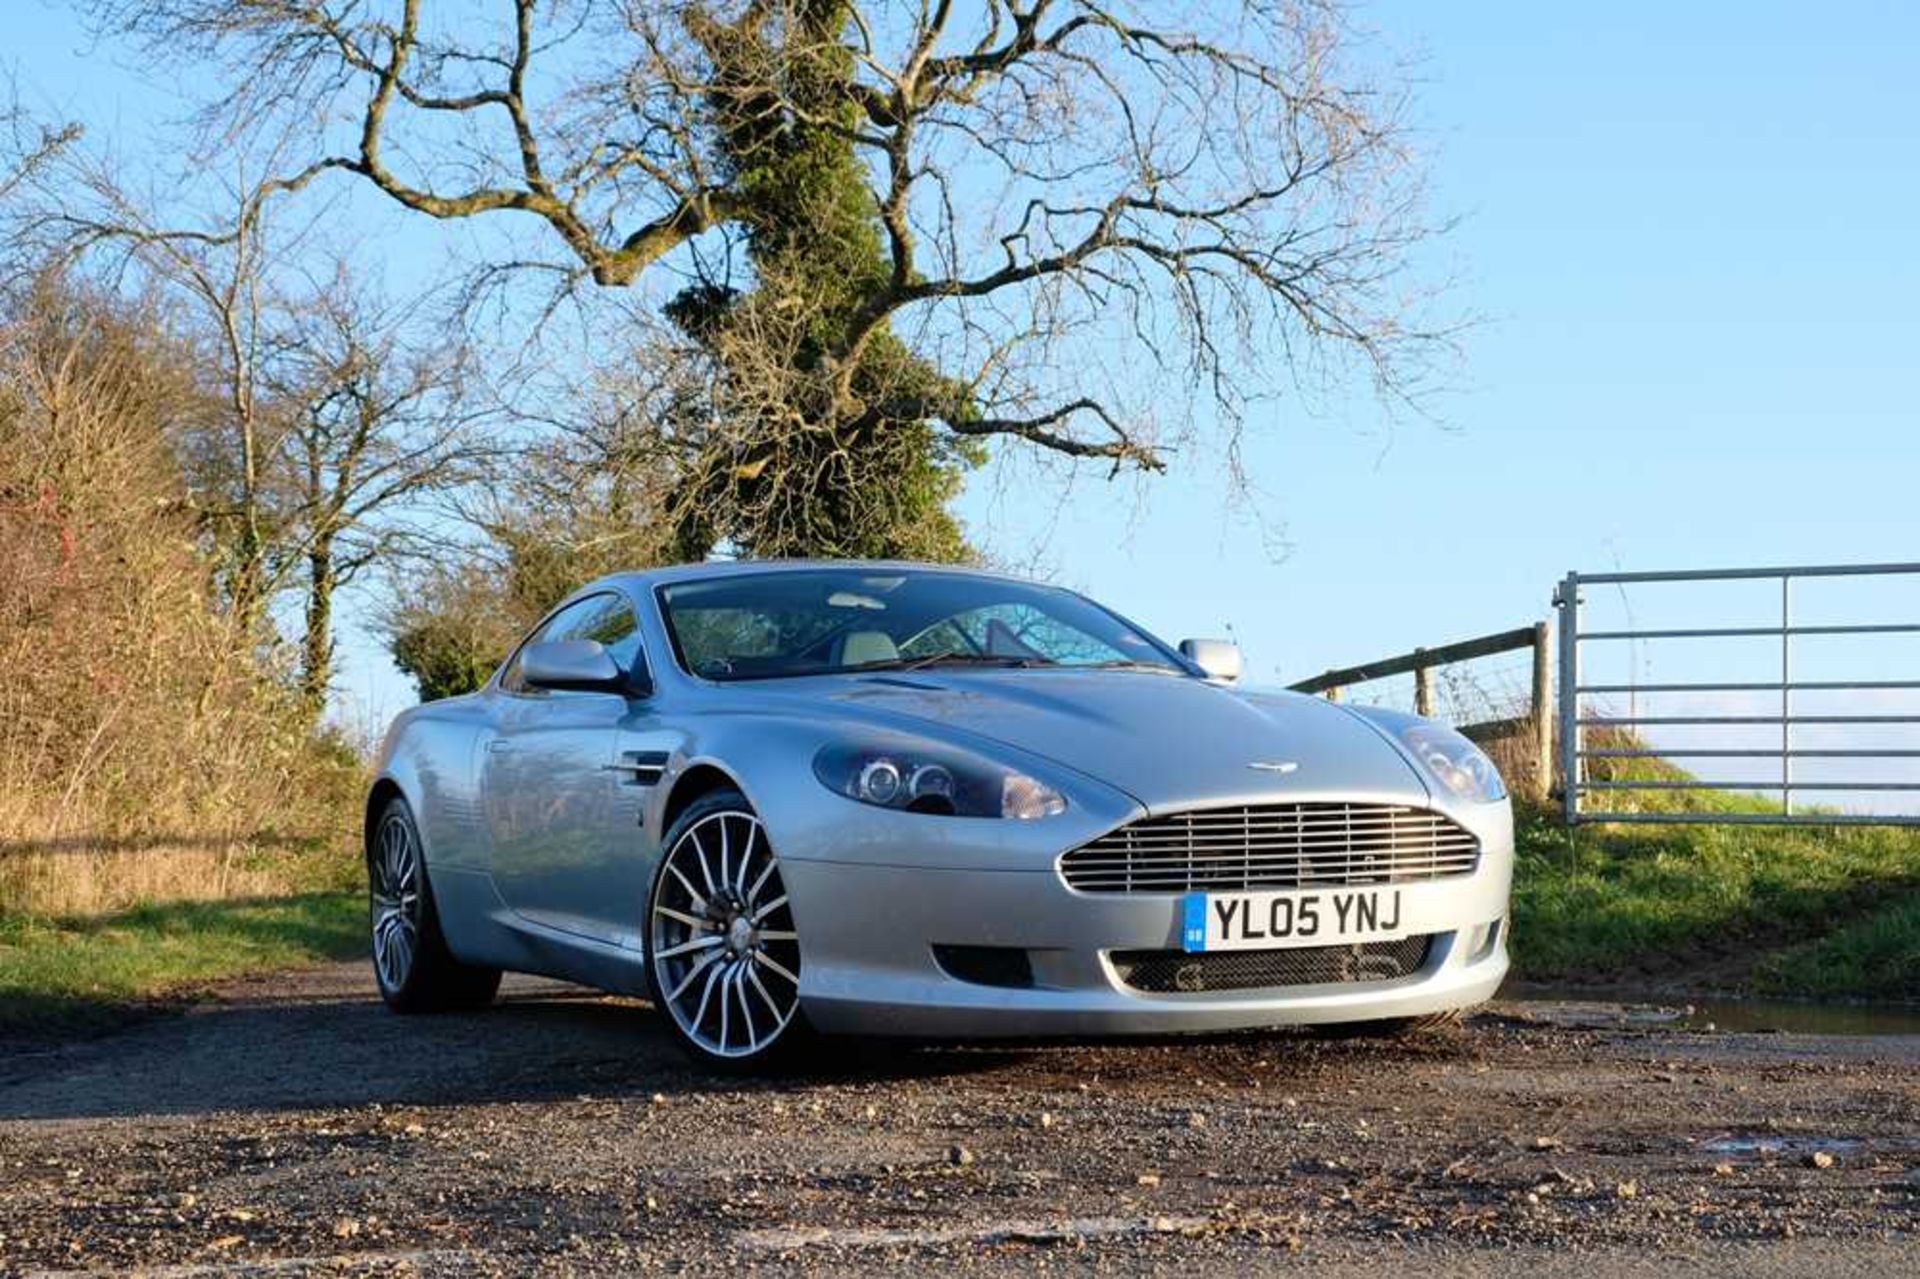 2005 Aston Martin DB9 c.25,000 from new and 4 former keepers - Image 2 of 59